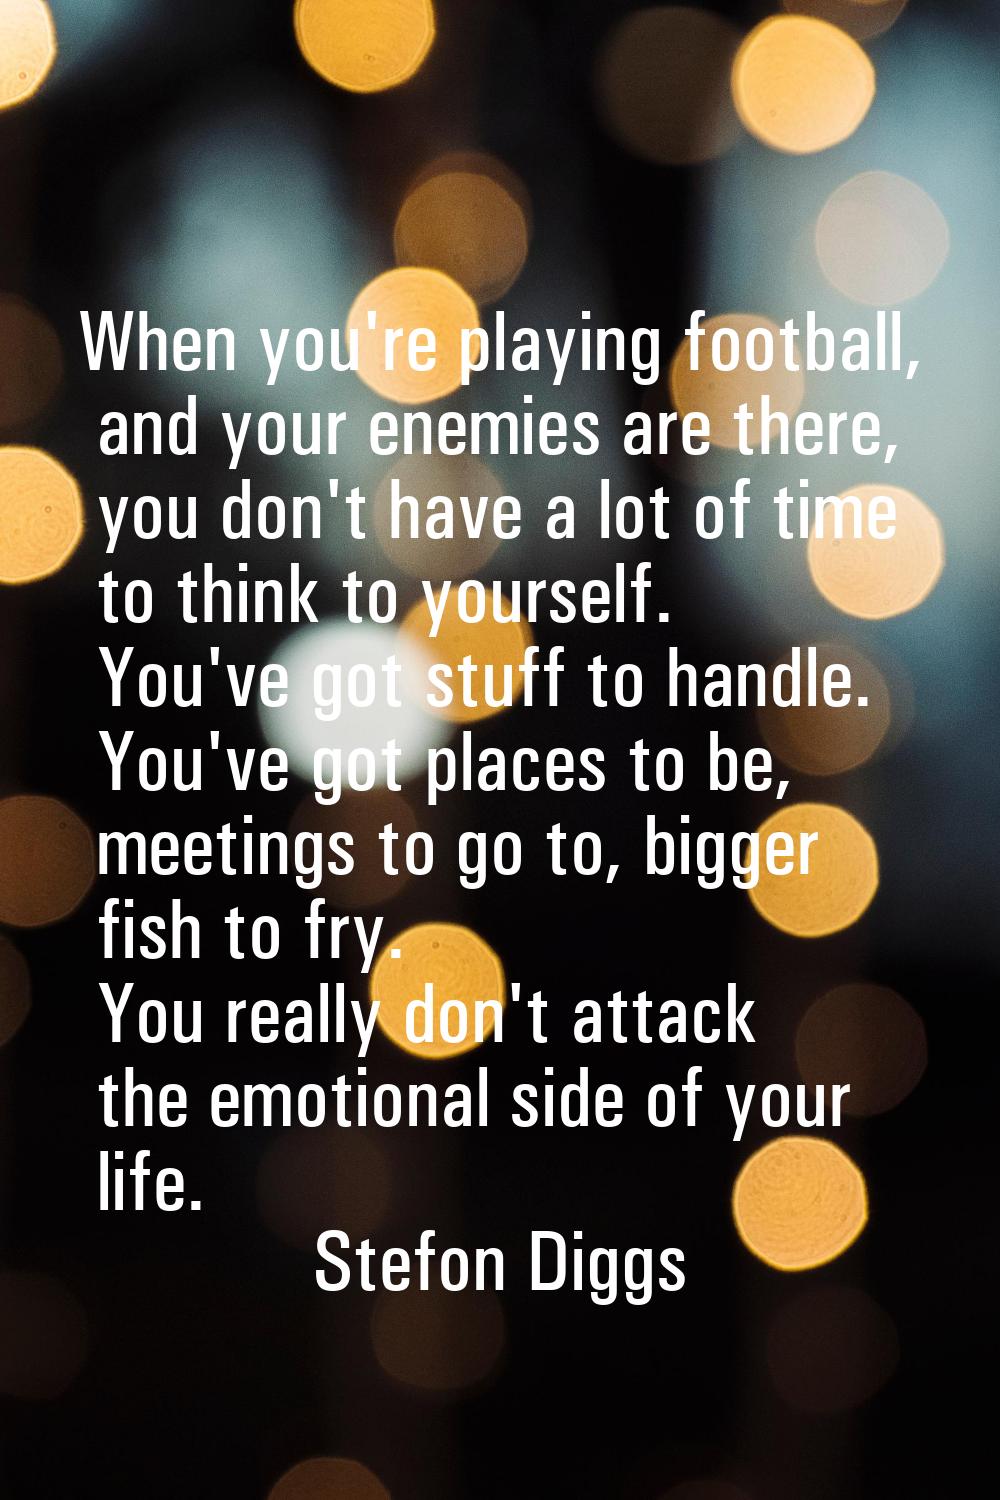 When you're playing football, and your enemies are there, you don't have a lot of time to think to 